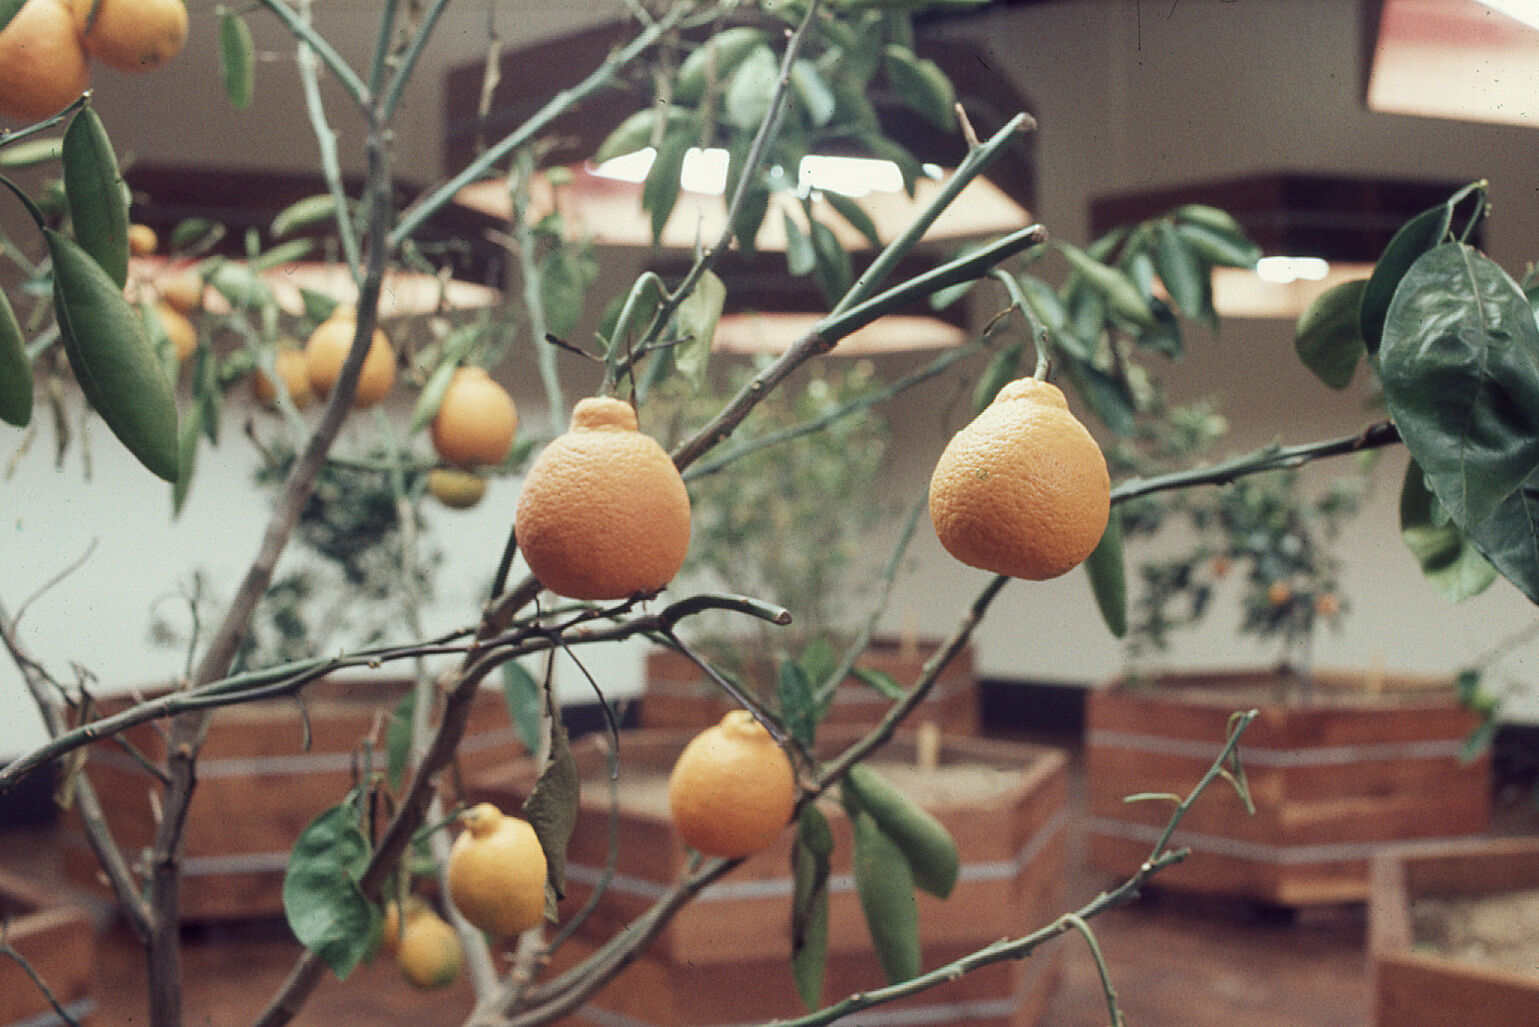 Orange fruits hanging from a tree with green leaves, indoors with wooden planters in the background.